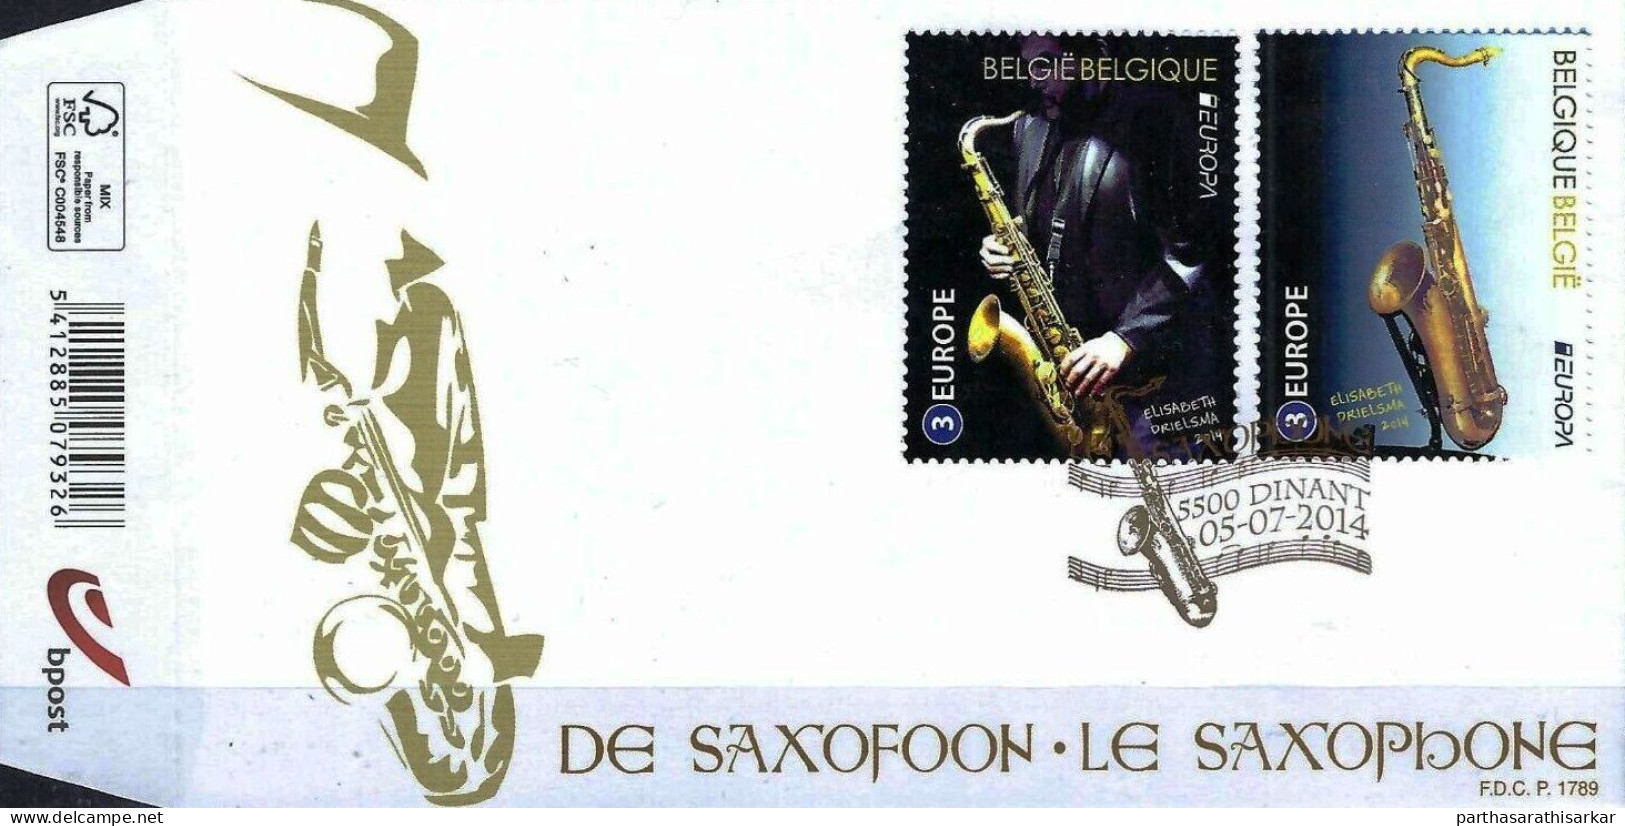 BELGIUM 2014 EUROPA CEPT MUSICAL INSTRUMENTS UNUSUAL STAMPS FDC RARE (HIGH FACE 15.8 EURO) - Storia Postale